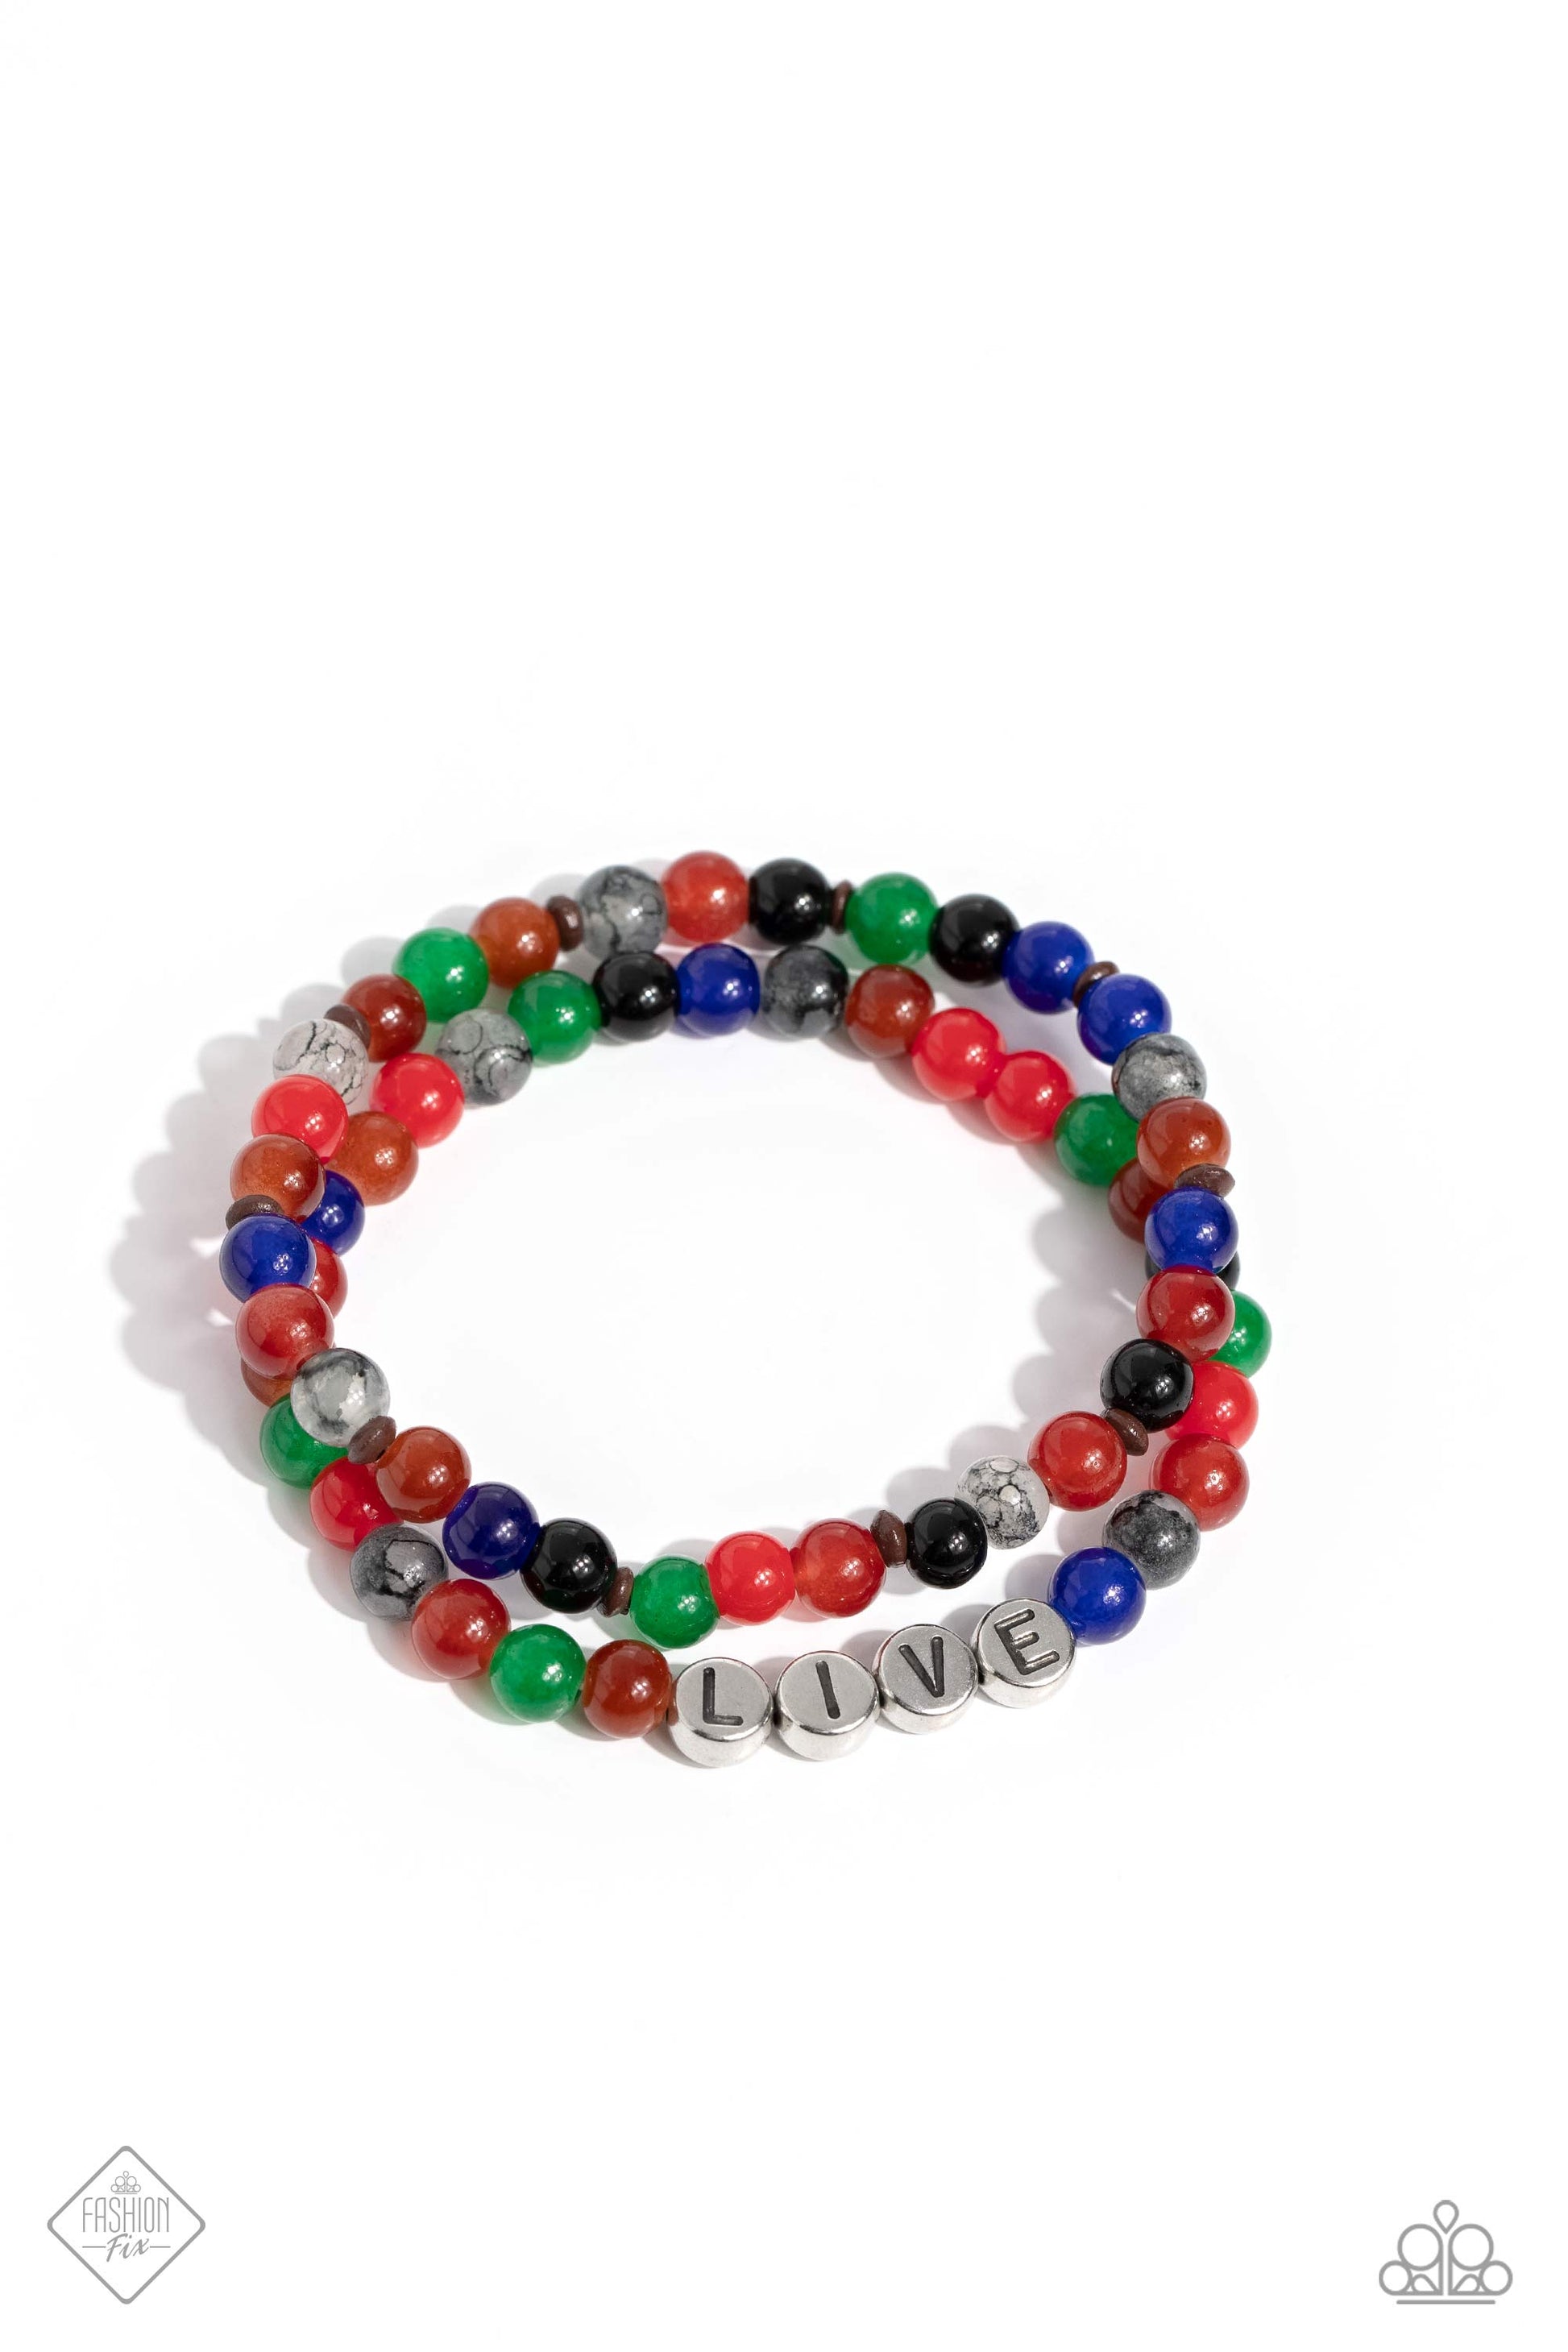 BEAD That As It May - Multi Color Bracelet - Paparazzi Accessories - Countless stone beads in a range of vibrant colors are threaded along a pair of stretchy bands to create a stack of earthy bracelets. Silver discs stamped with black letters are centered within one of the colorful strands, spelling out the word, "LIVE," in an inspirational finish. Sold as one set of two bracelets.